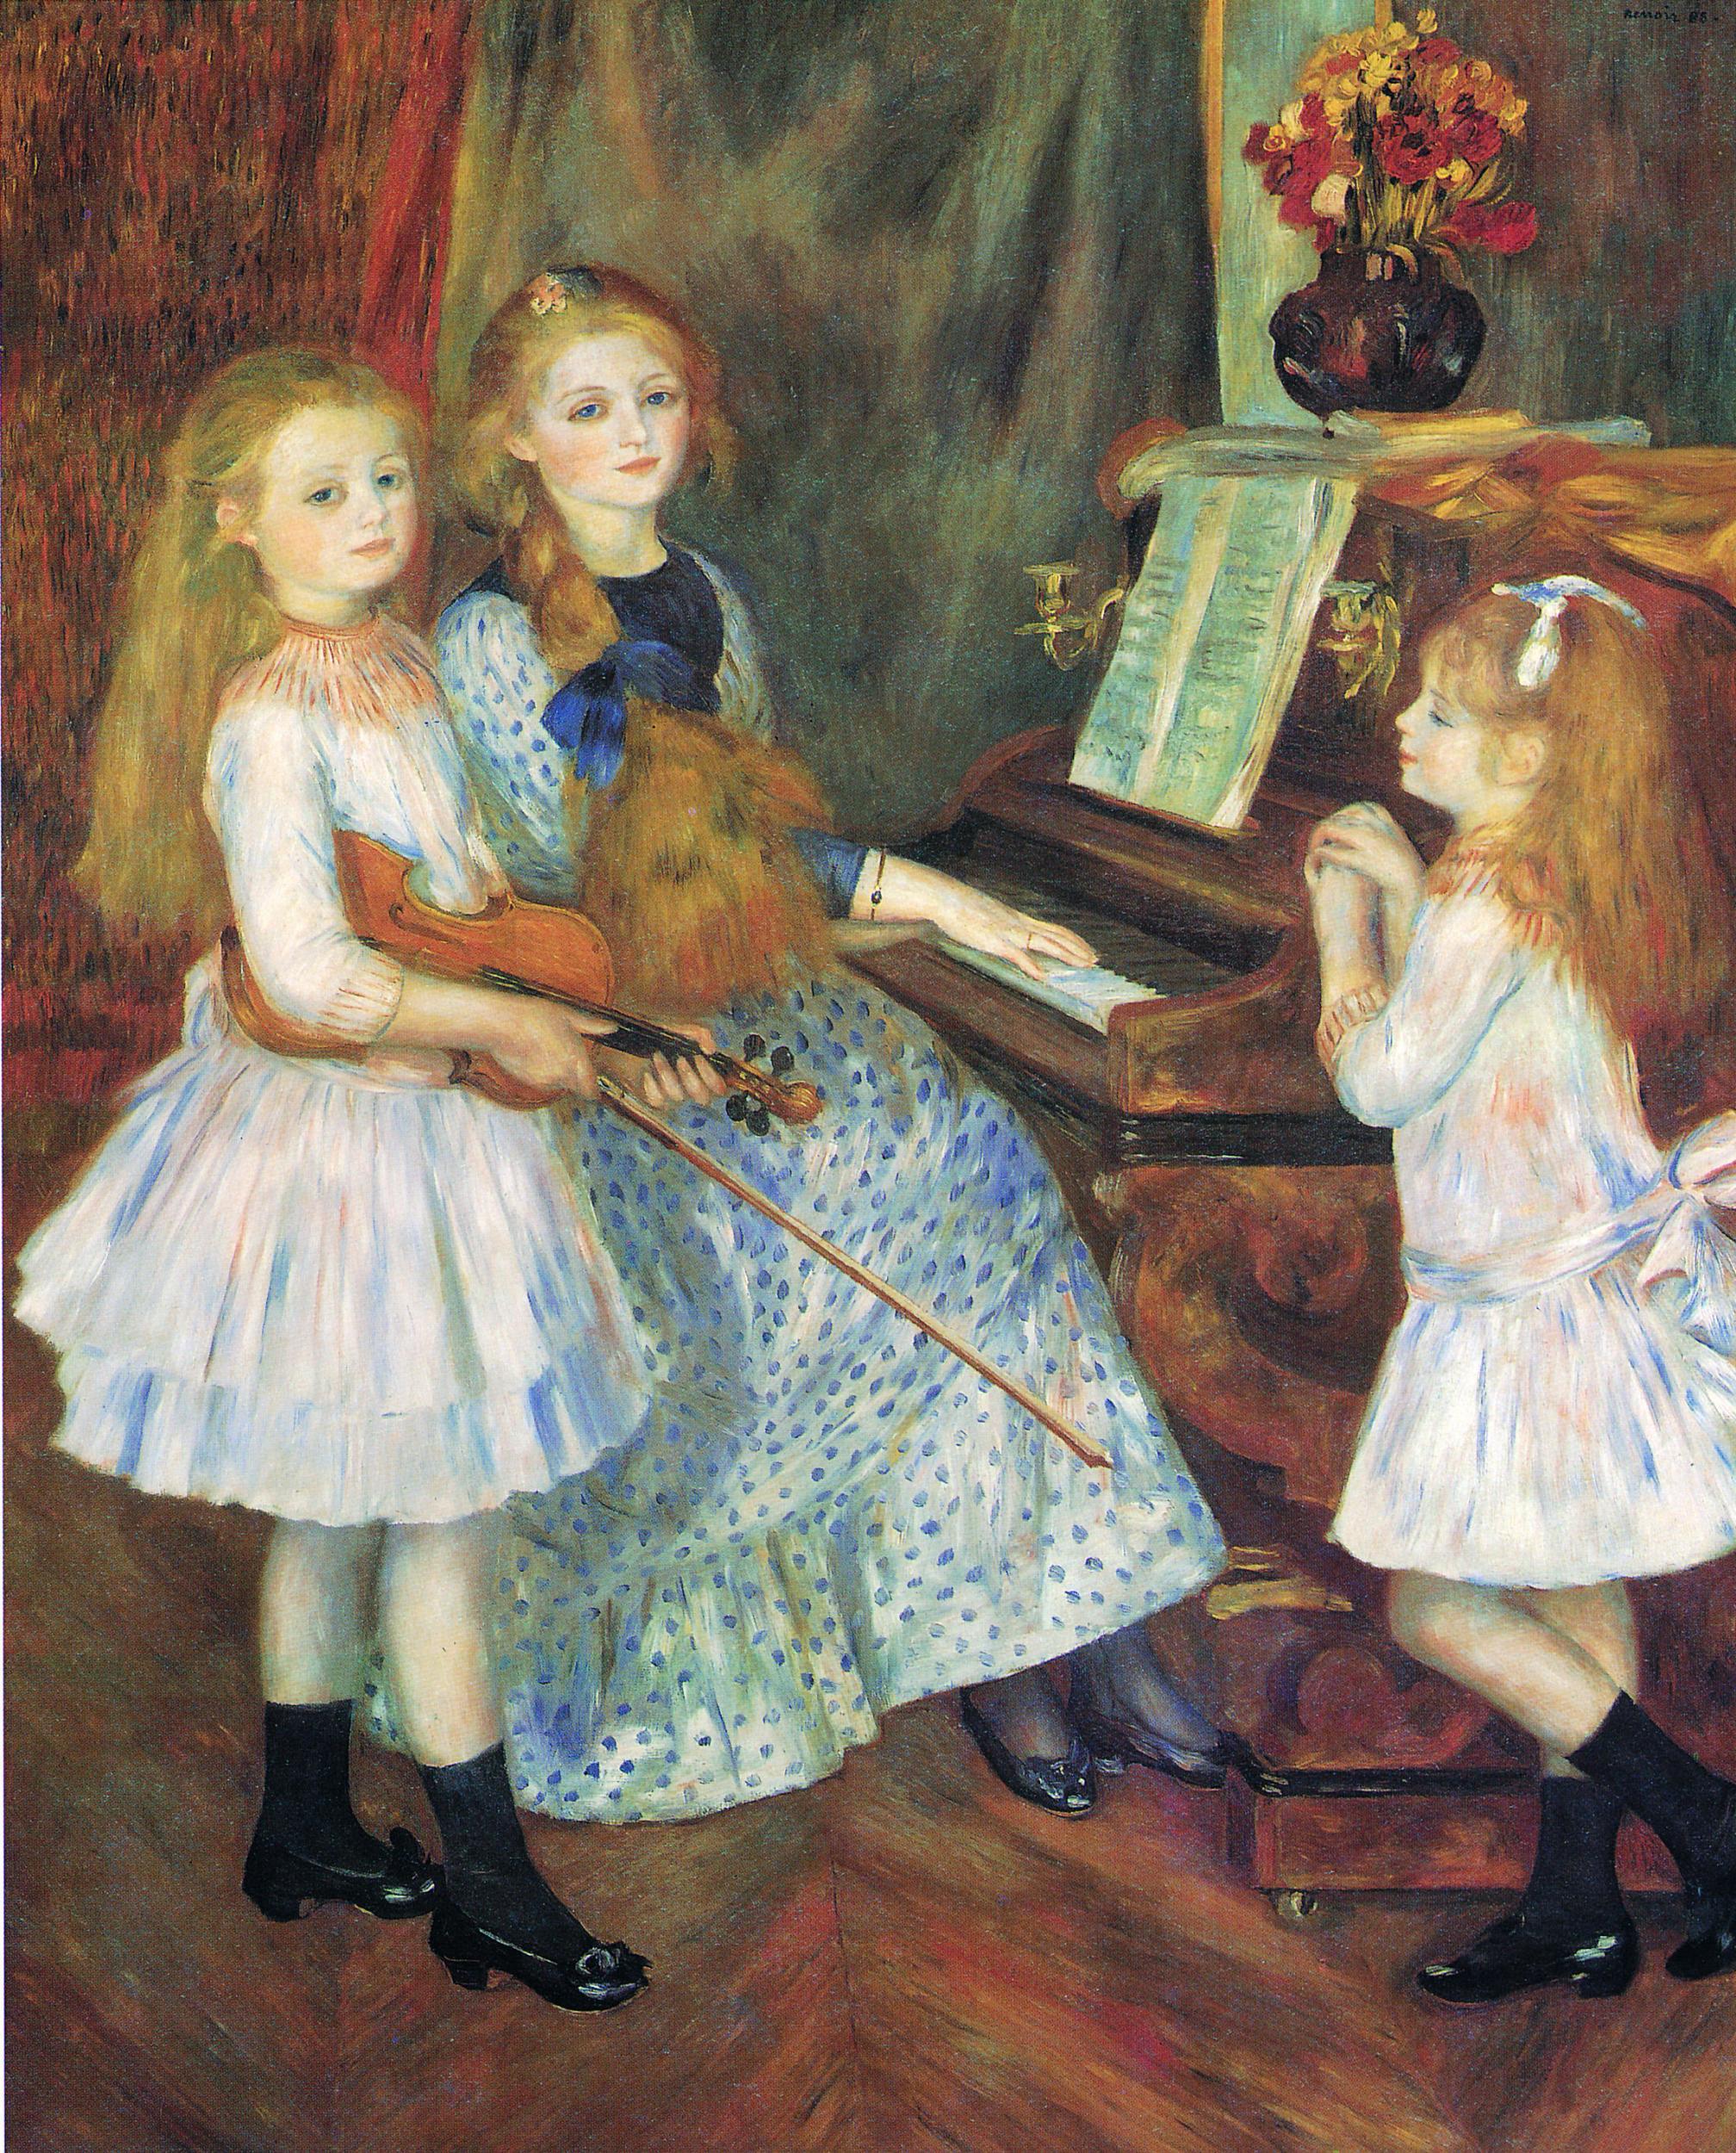 &#13;
‘The Daughters of Catulle Mendes’ by Renoir, taken from Barbara Ehrlich White's new book (Thames &amp; Hudson)&#13;